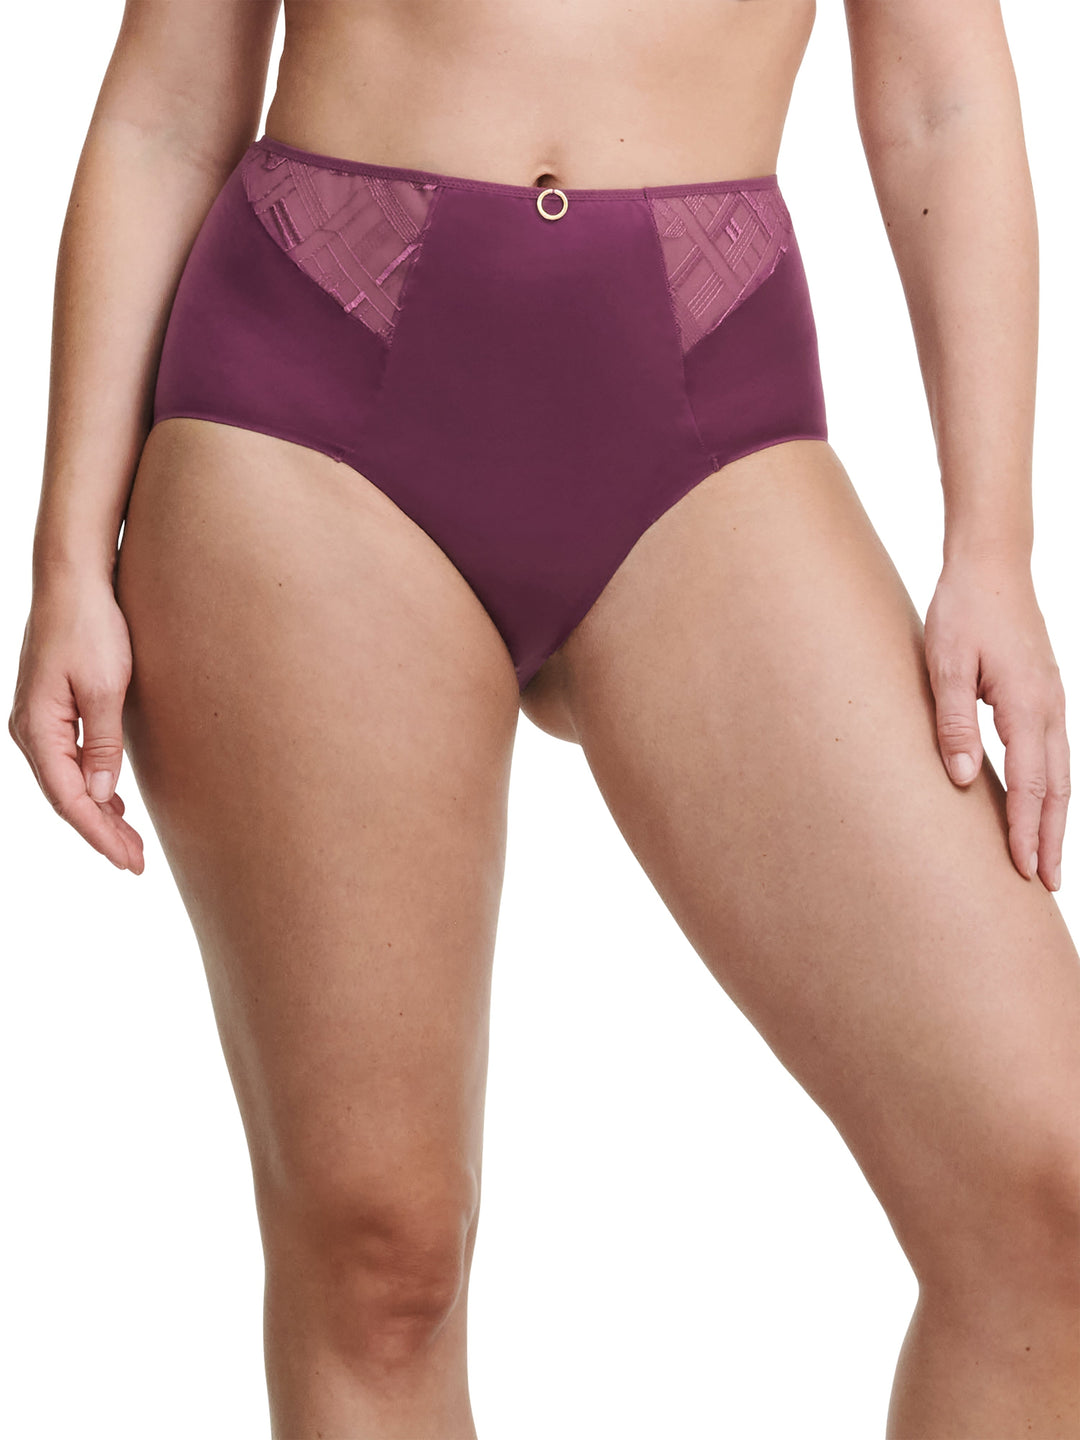 Chantelle - Graphic Support High Waisted Support Full Brief Tannin Full Brief Chantelle 